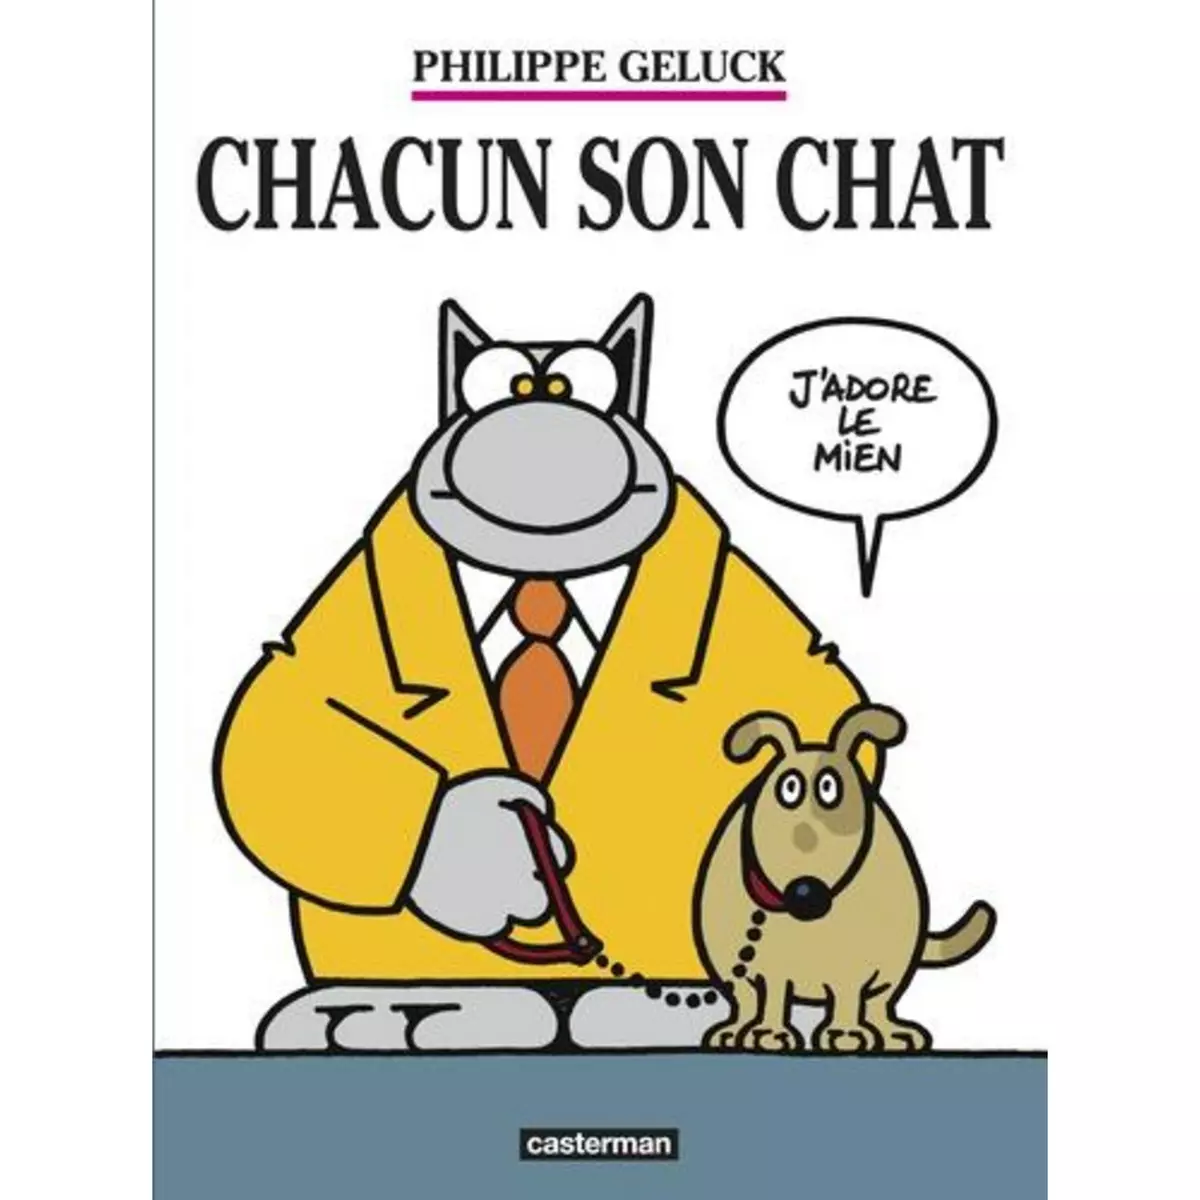  LE CHAT TOME 21 : CHACUN SON CHAT, Geluck Philippe